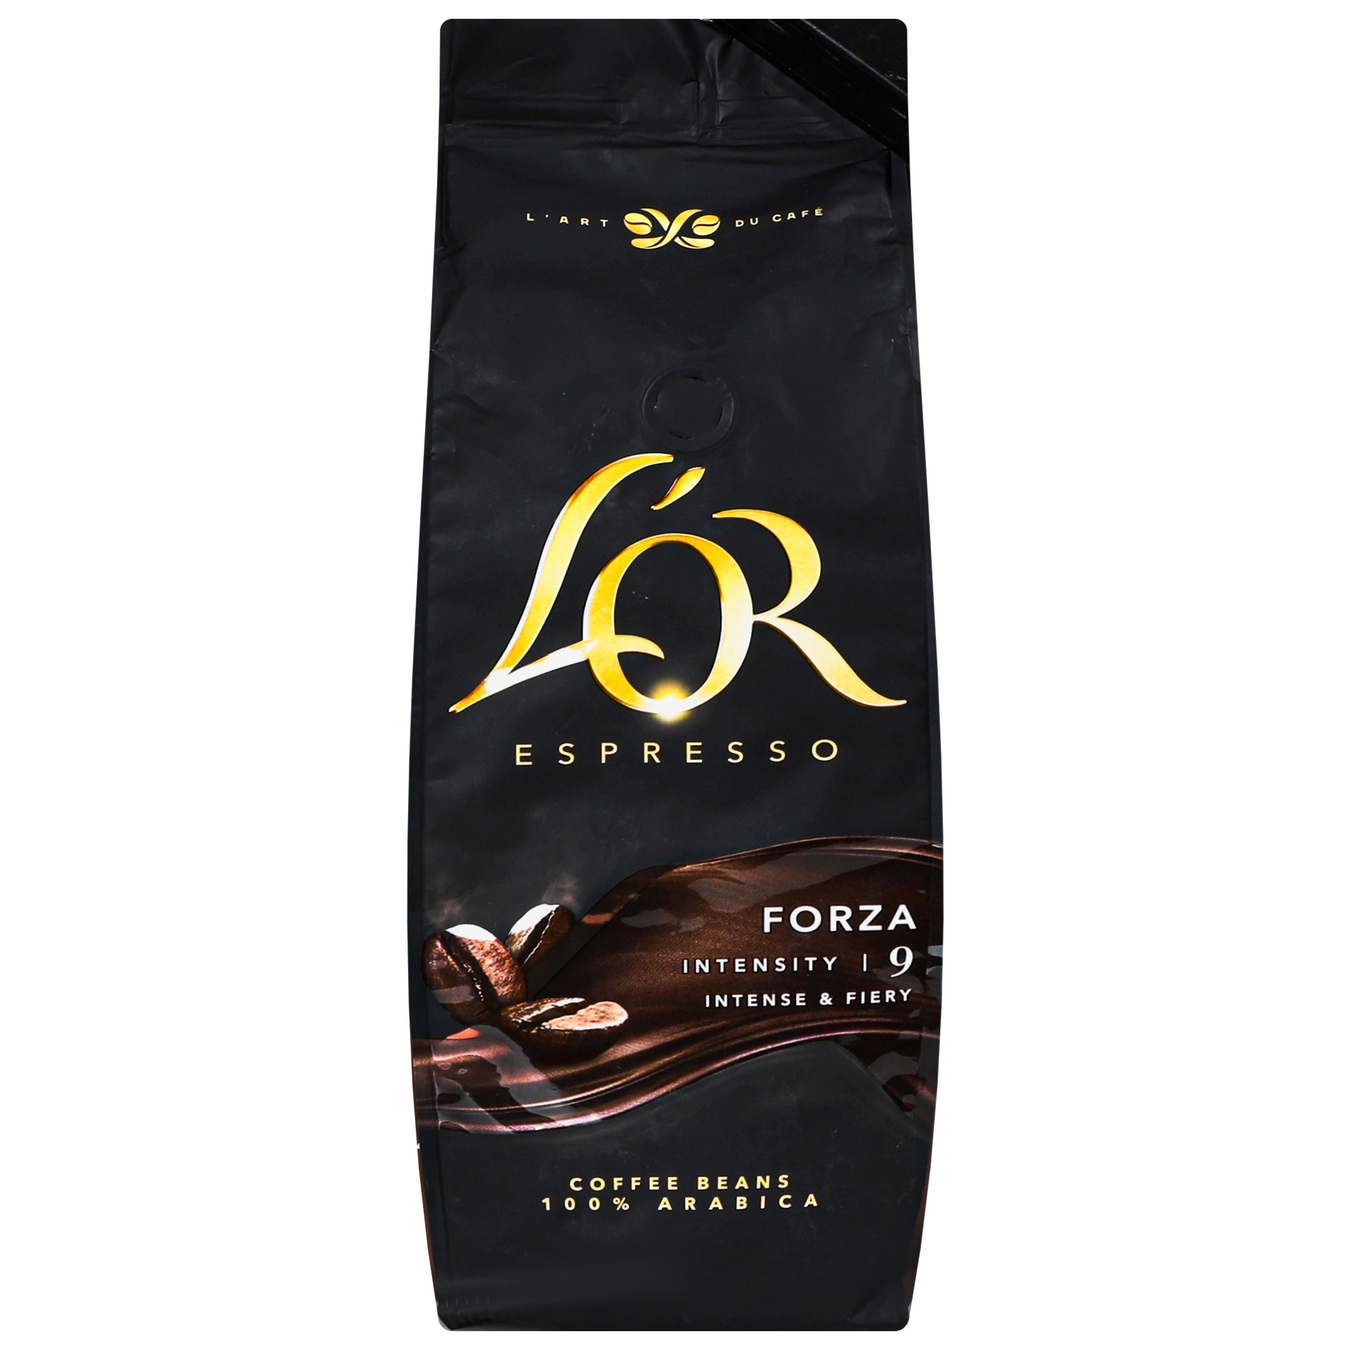 L'or Espresso Forza coffee roasted in beans 500g